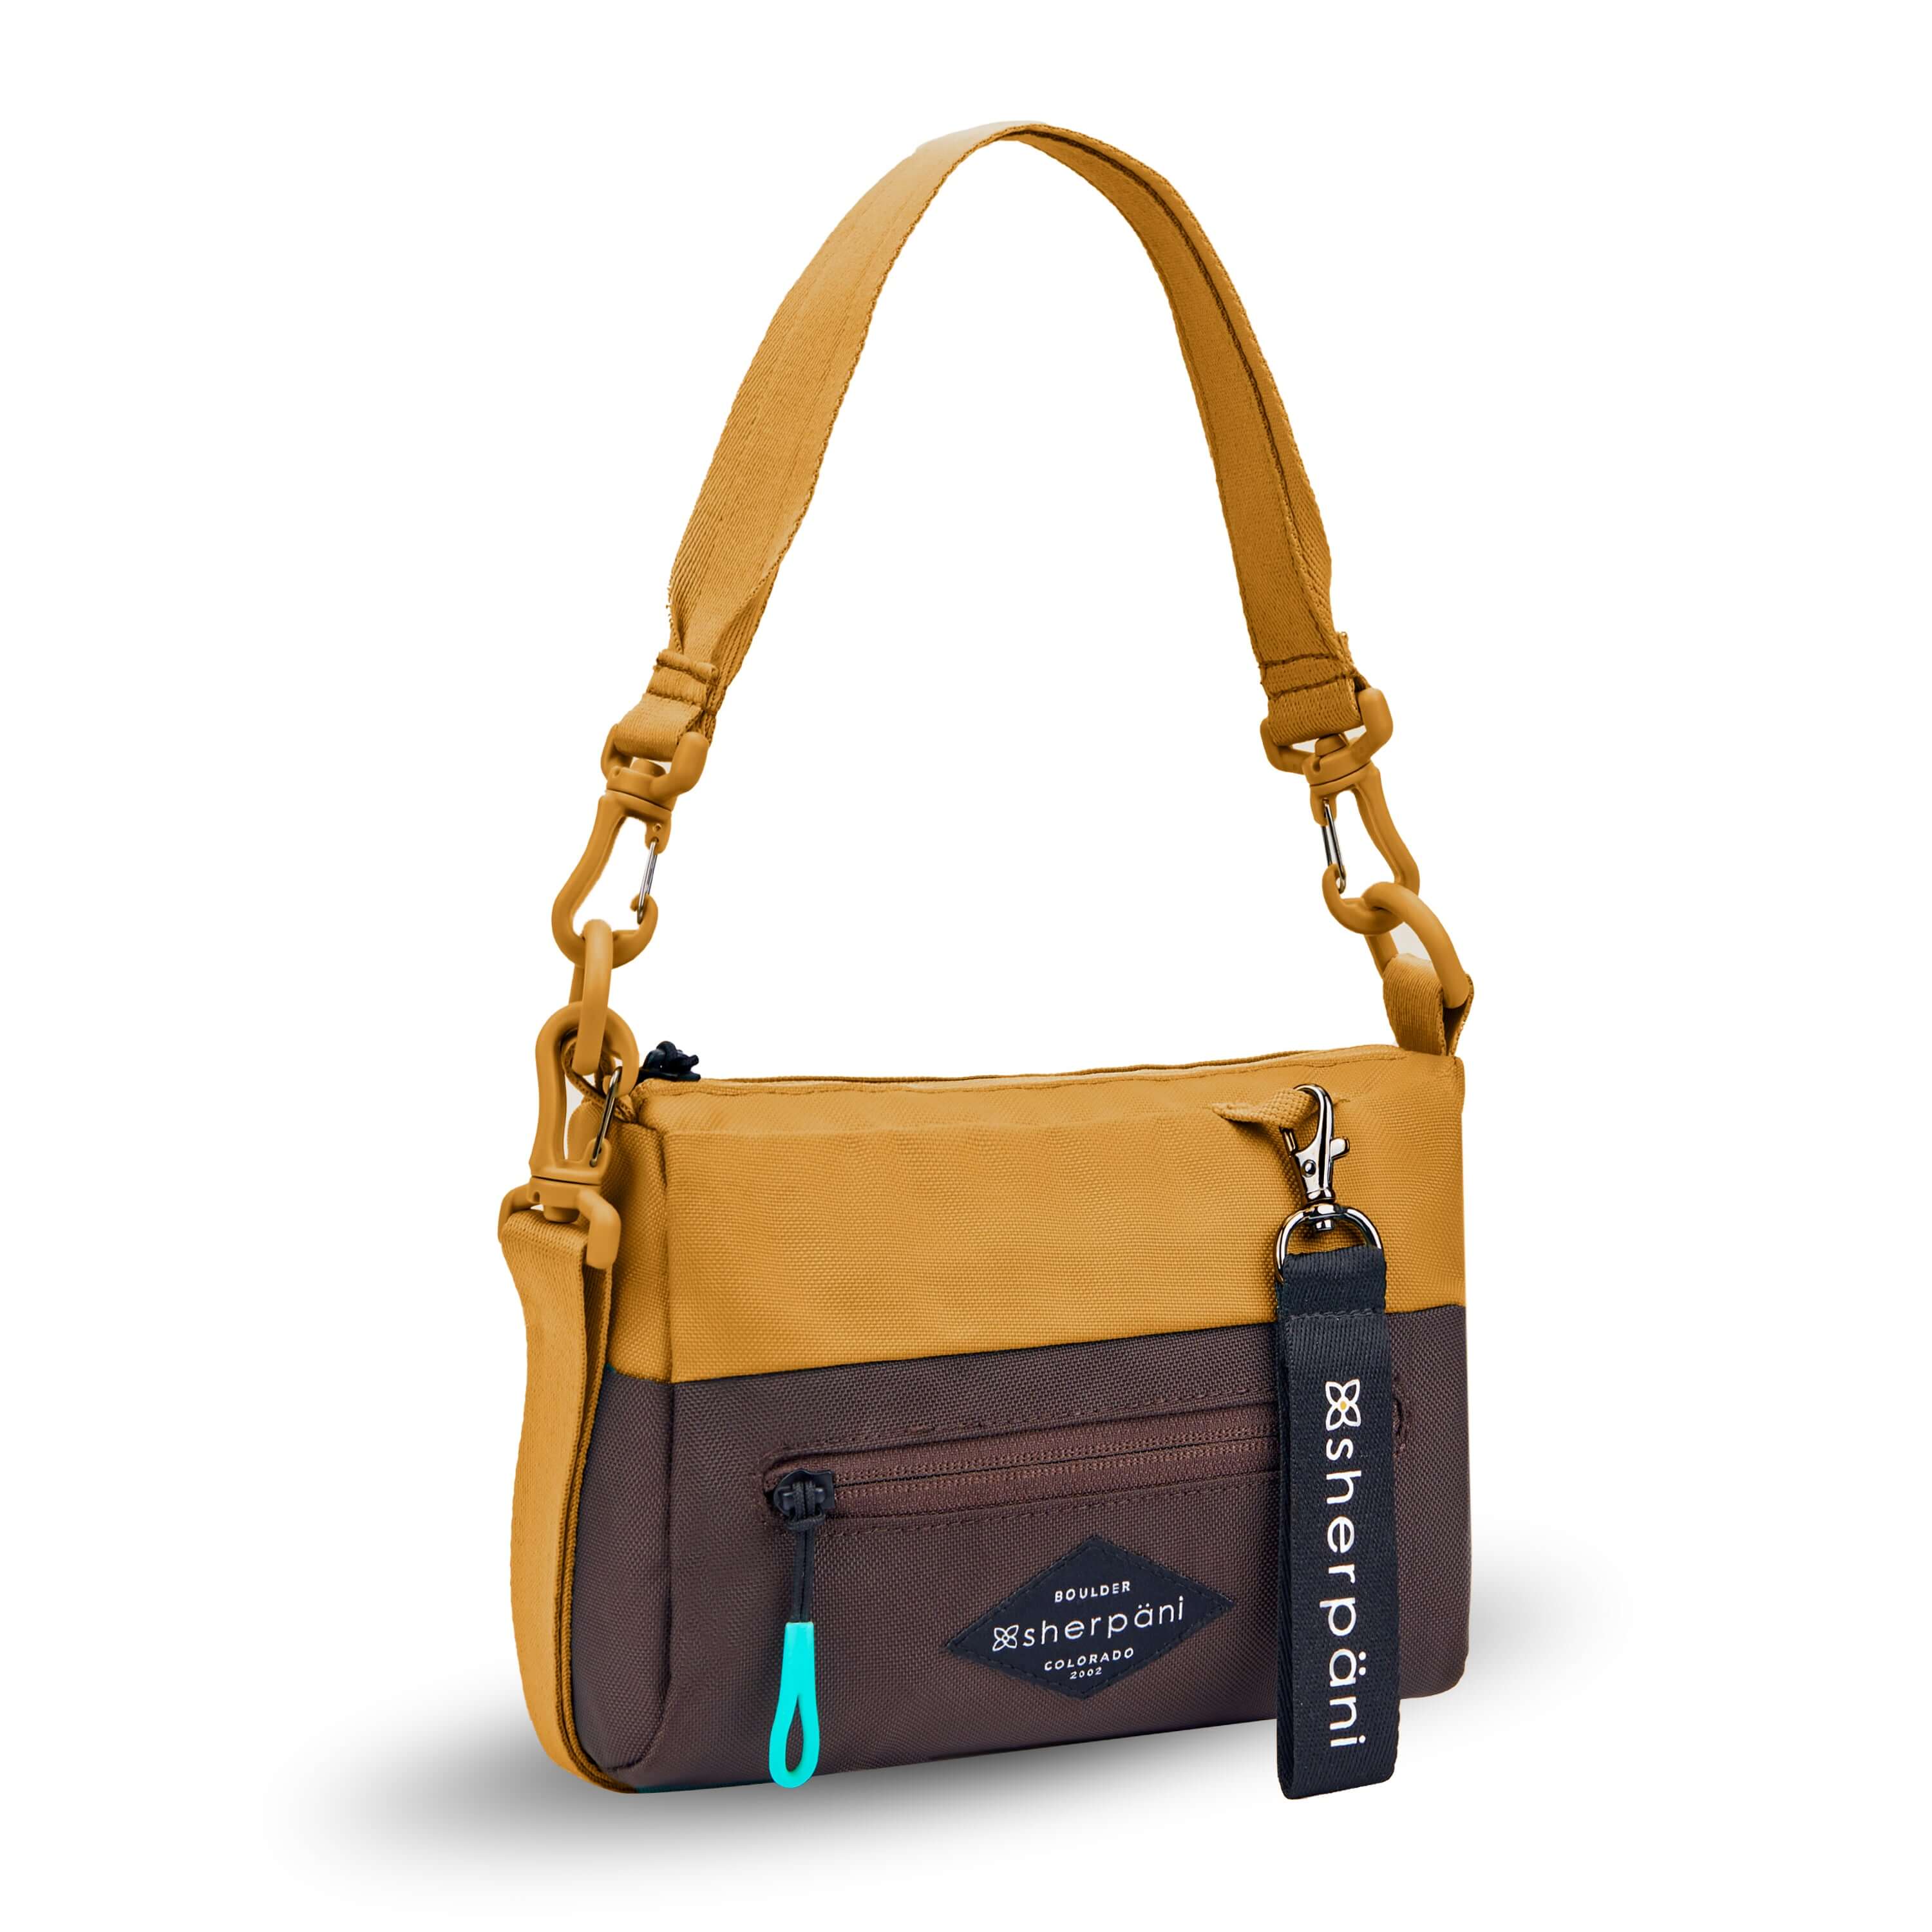 Angled front view of Sherpani's purse, the Skye in Sundial. It is two-toned, the top half of the bag is burnt yellow and the bottom half of the bag is brown. There is an external zipper compartment with an easy-pull zipper accented in aqua. There is a branded Sherpani keychain clipped to the upper right corner. The bag has a detachable short strap and a longer detachable/adjustable crossbody strap. #color_sundial